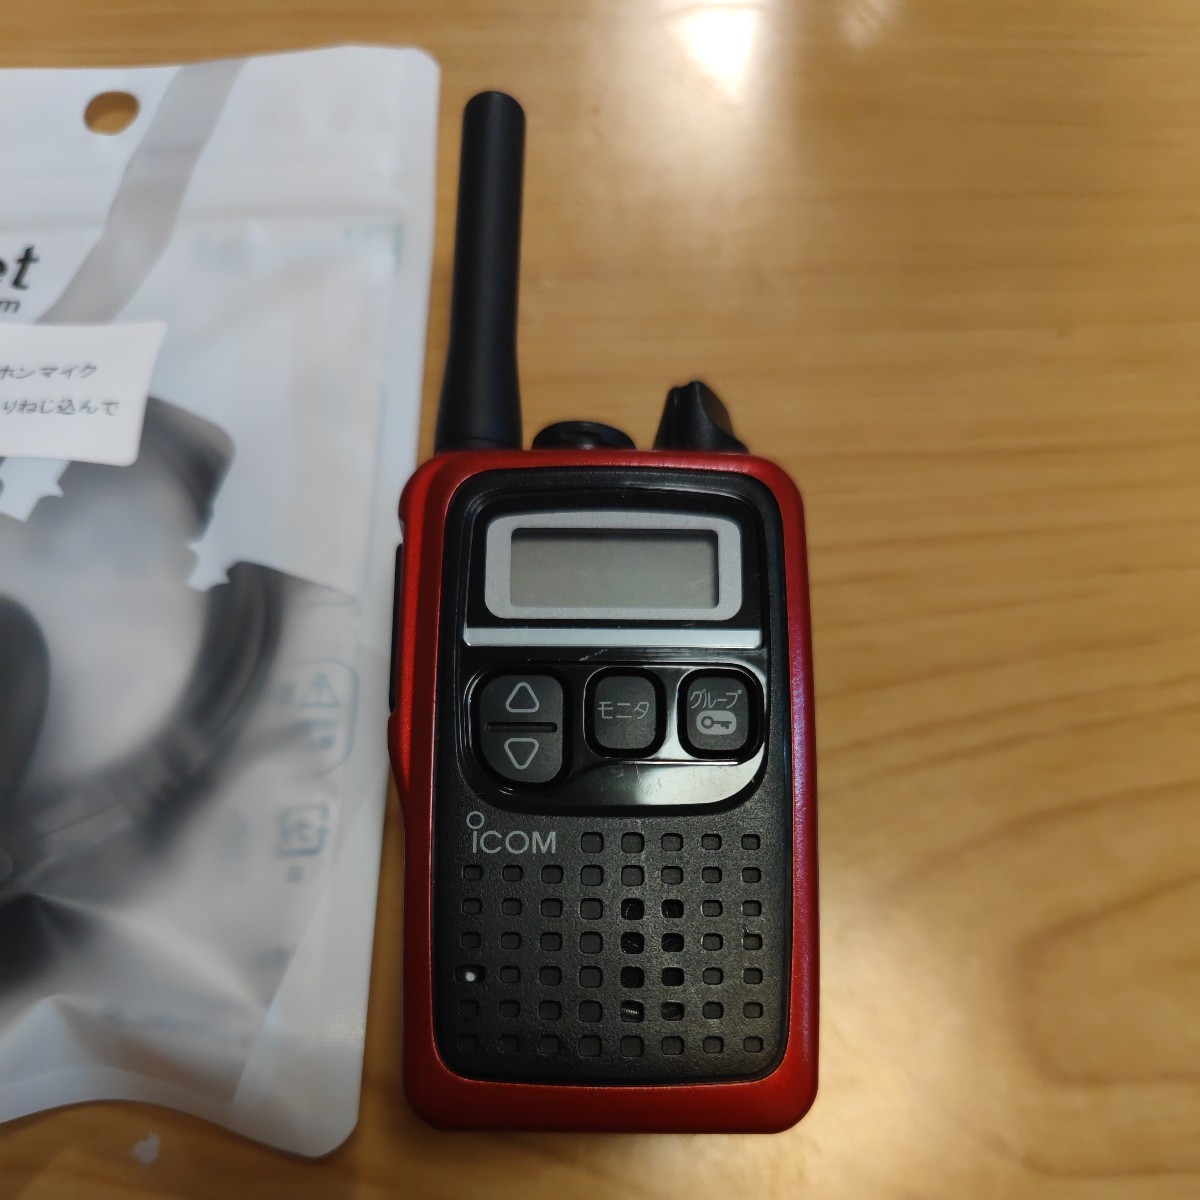  beautiful goods earphone new goods ICOM special small electric power transceiver IC-4300 license unnecessary Icom. too much use has not done therefore considerably beautiful goods besides same model exhibiting 